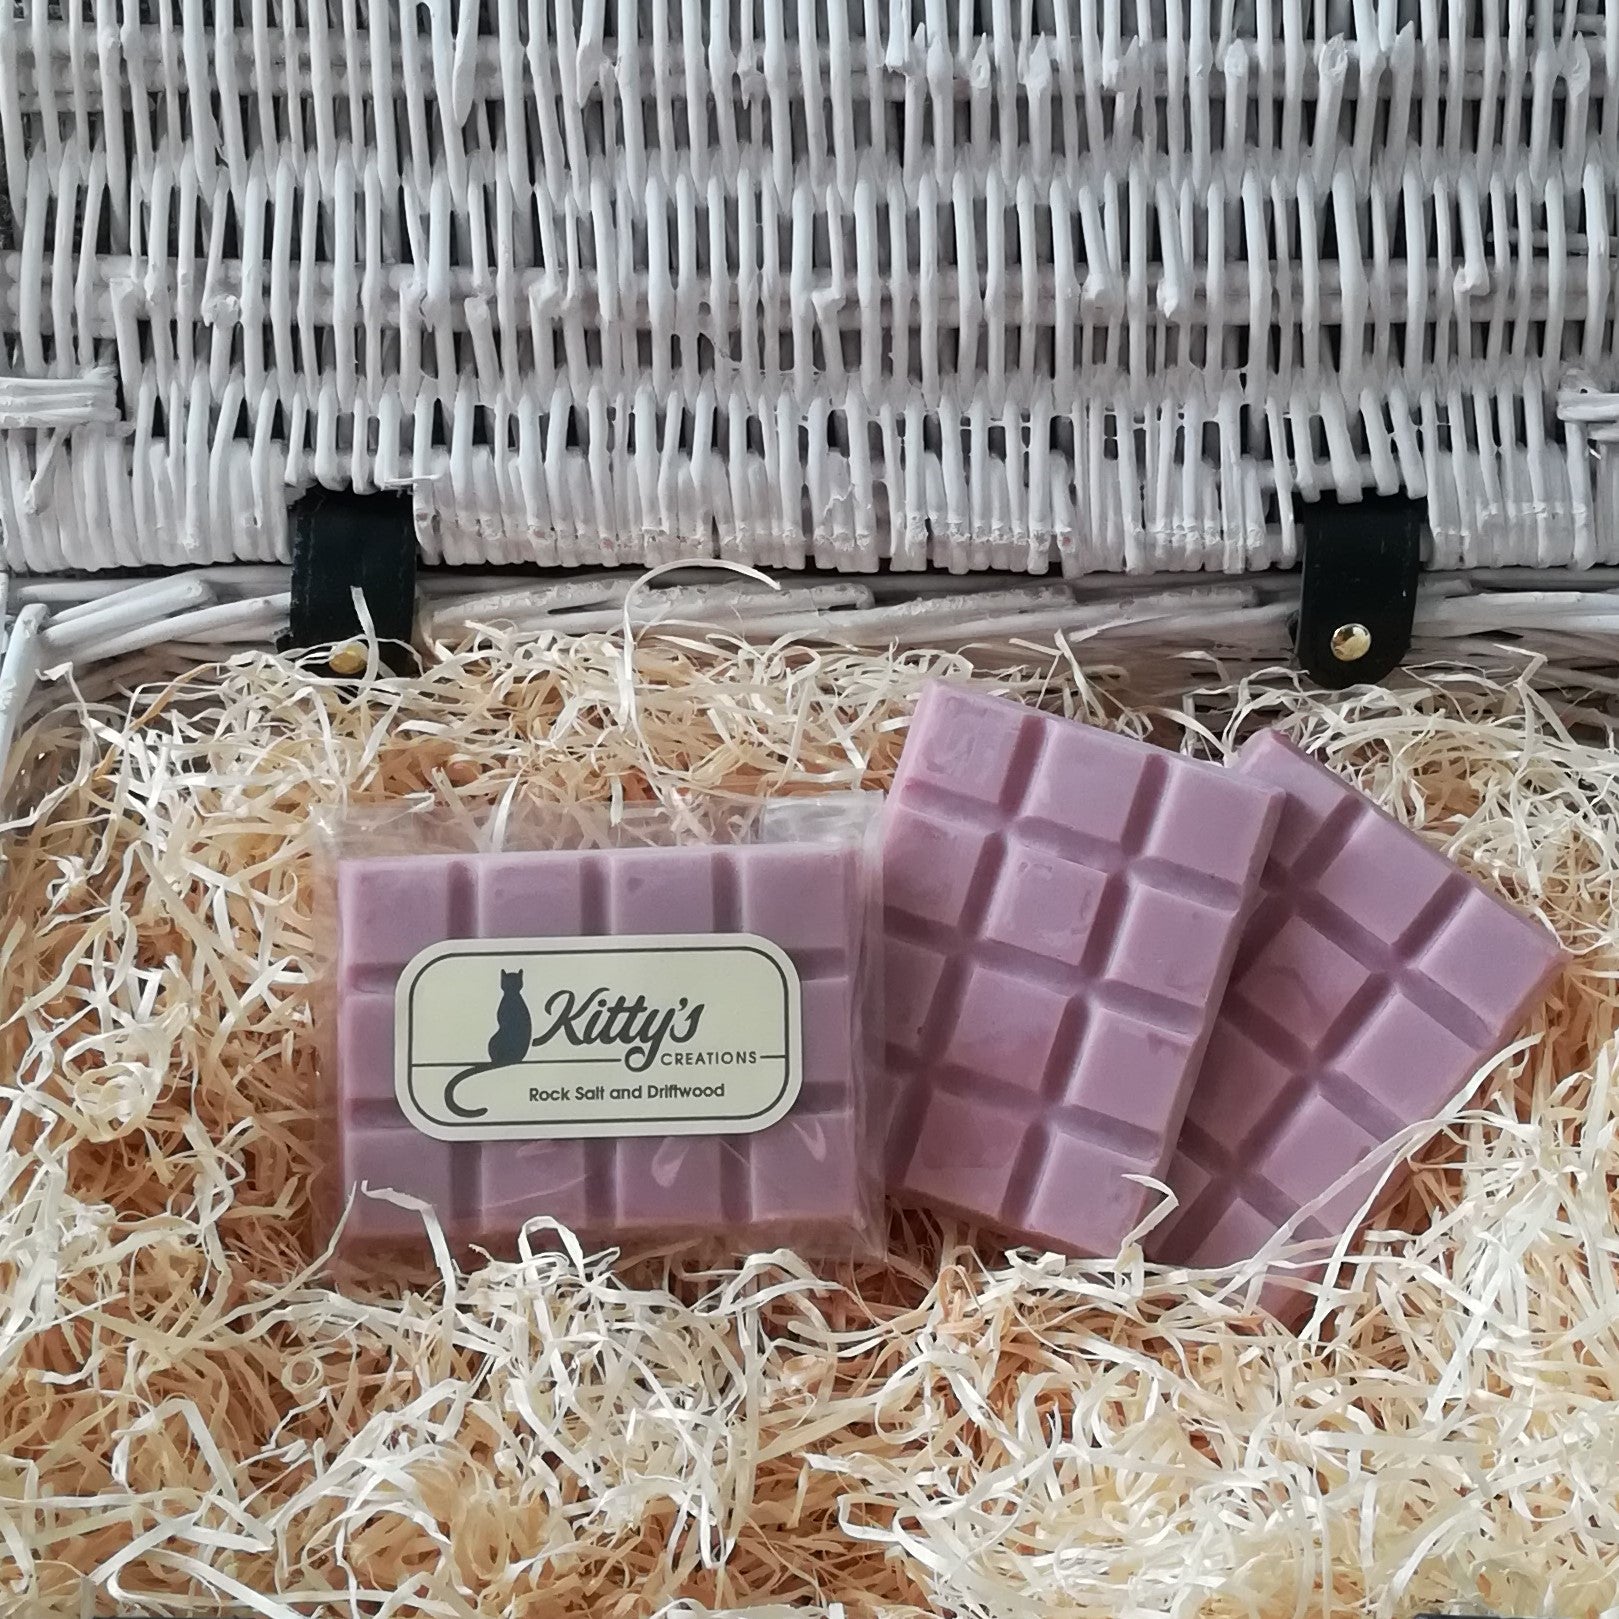 Three hand-made rectangular Wax Melts. Each one light mauve - pink resting in a basket of straw, The light fresh aroma reminiscent of days spent rock-pooling, a marine scent with coastal breezes mixed with seaweed, waterlily, and salt crusted driftwood with the masculine warmth of amber patchouli and musk.